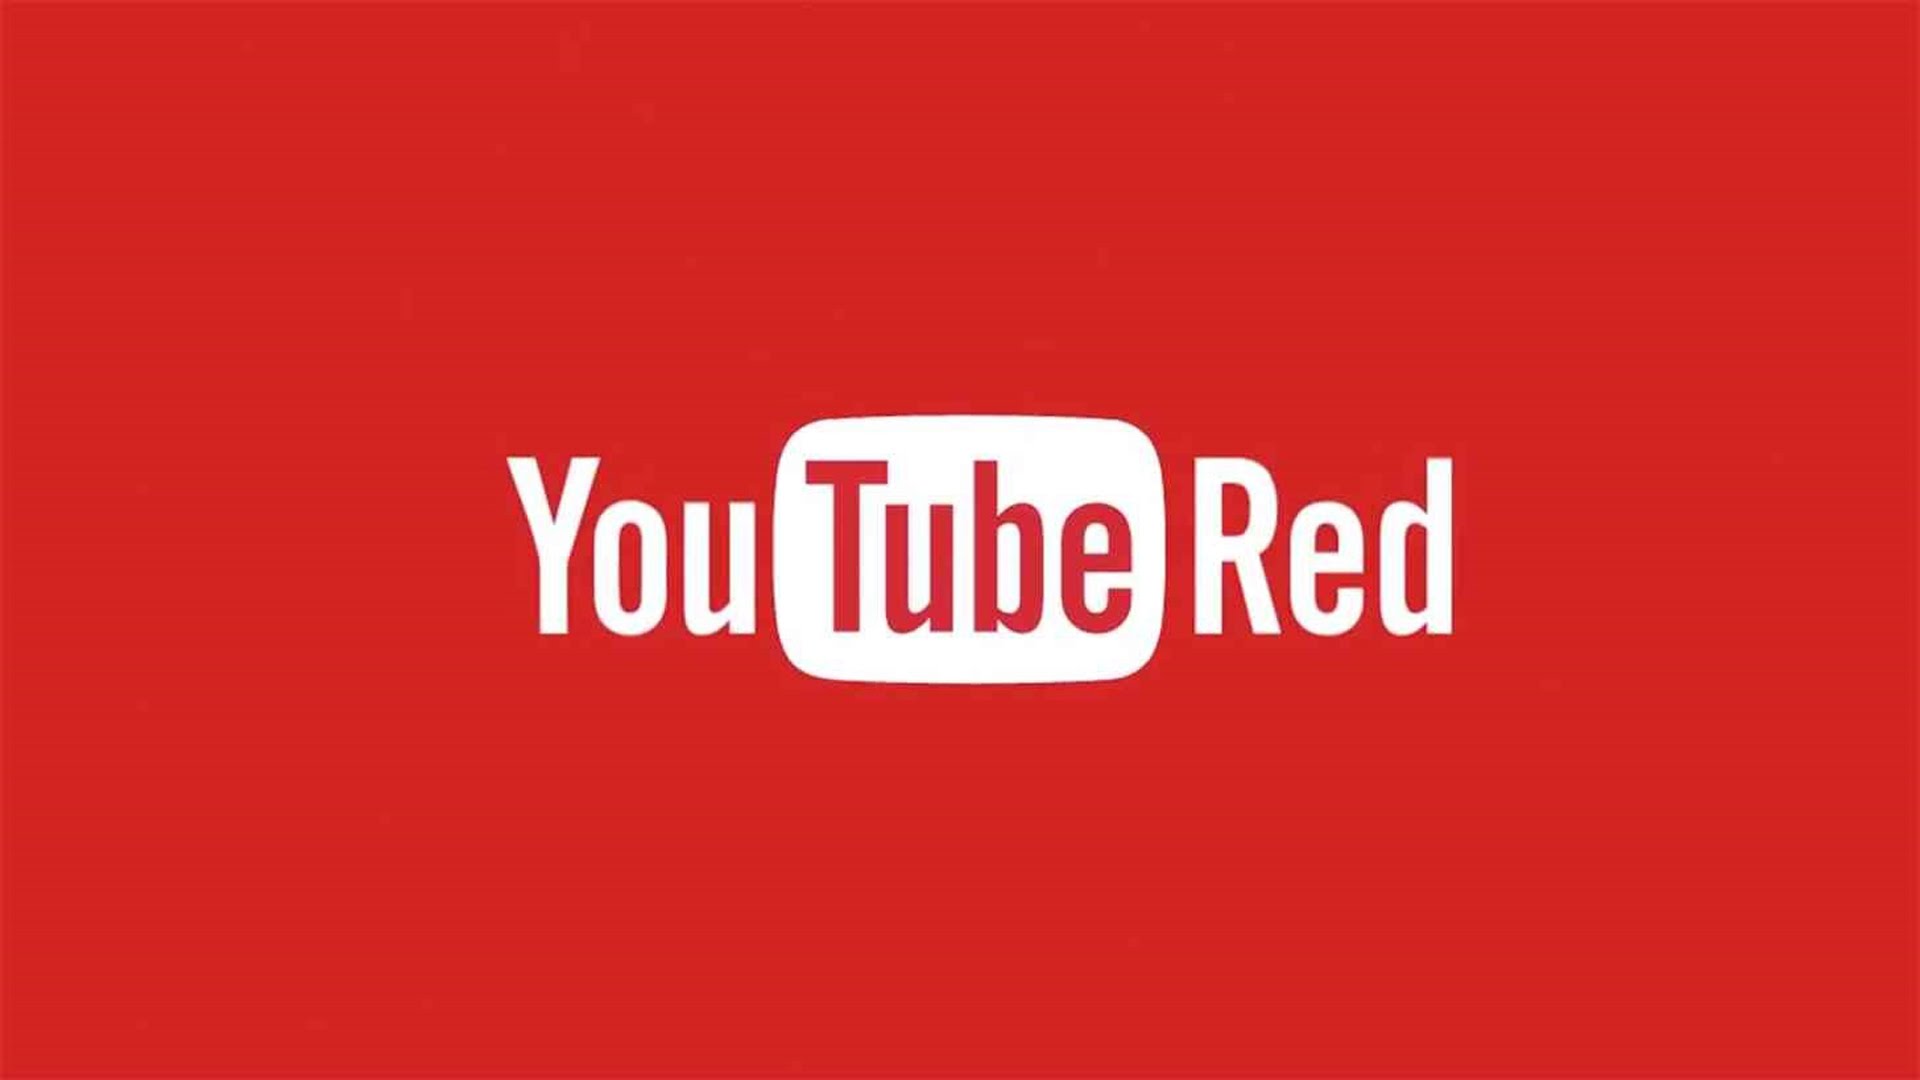 YouTube Red Announces Series Renewals and Orders - canceled TV shows ...